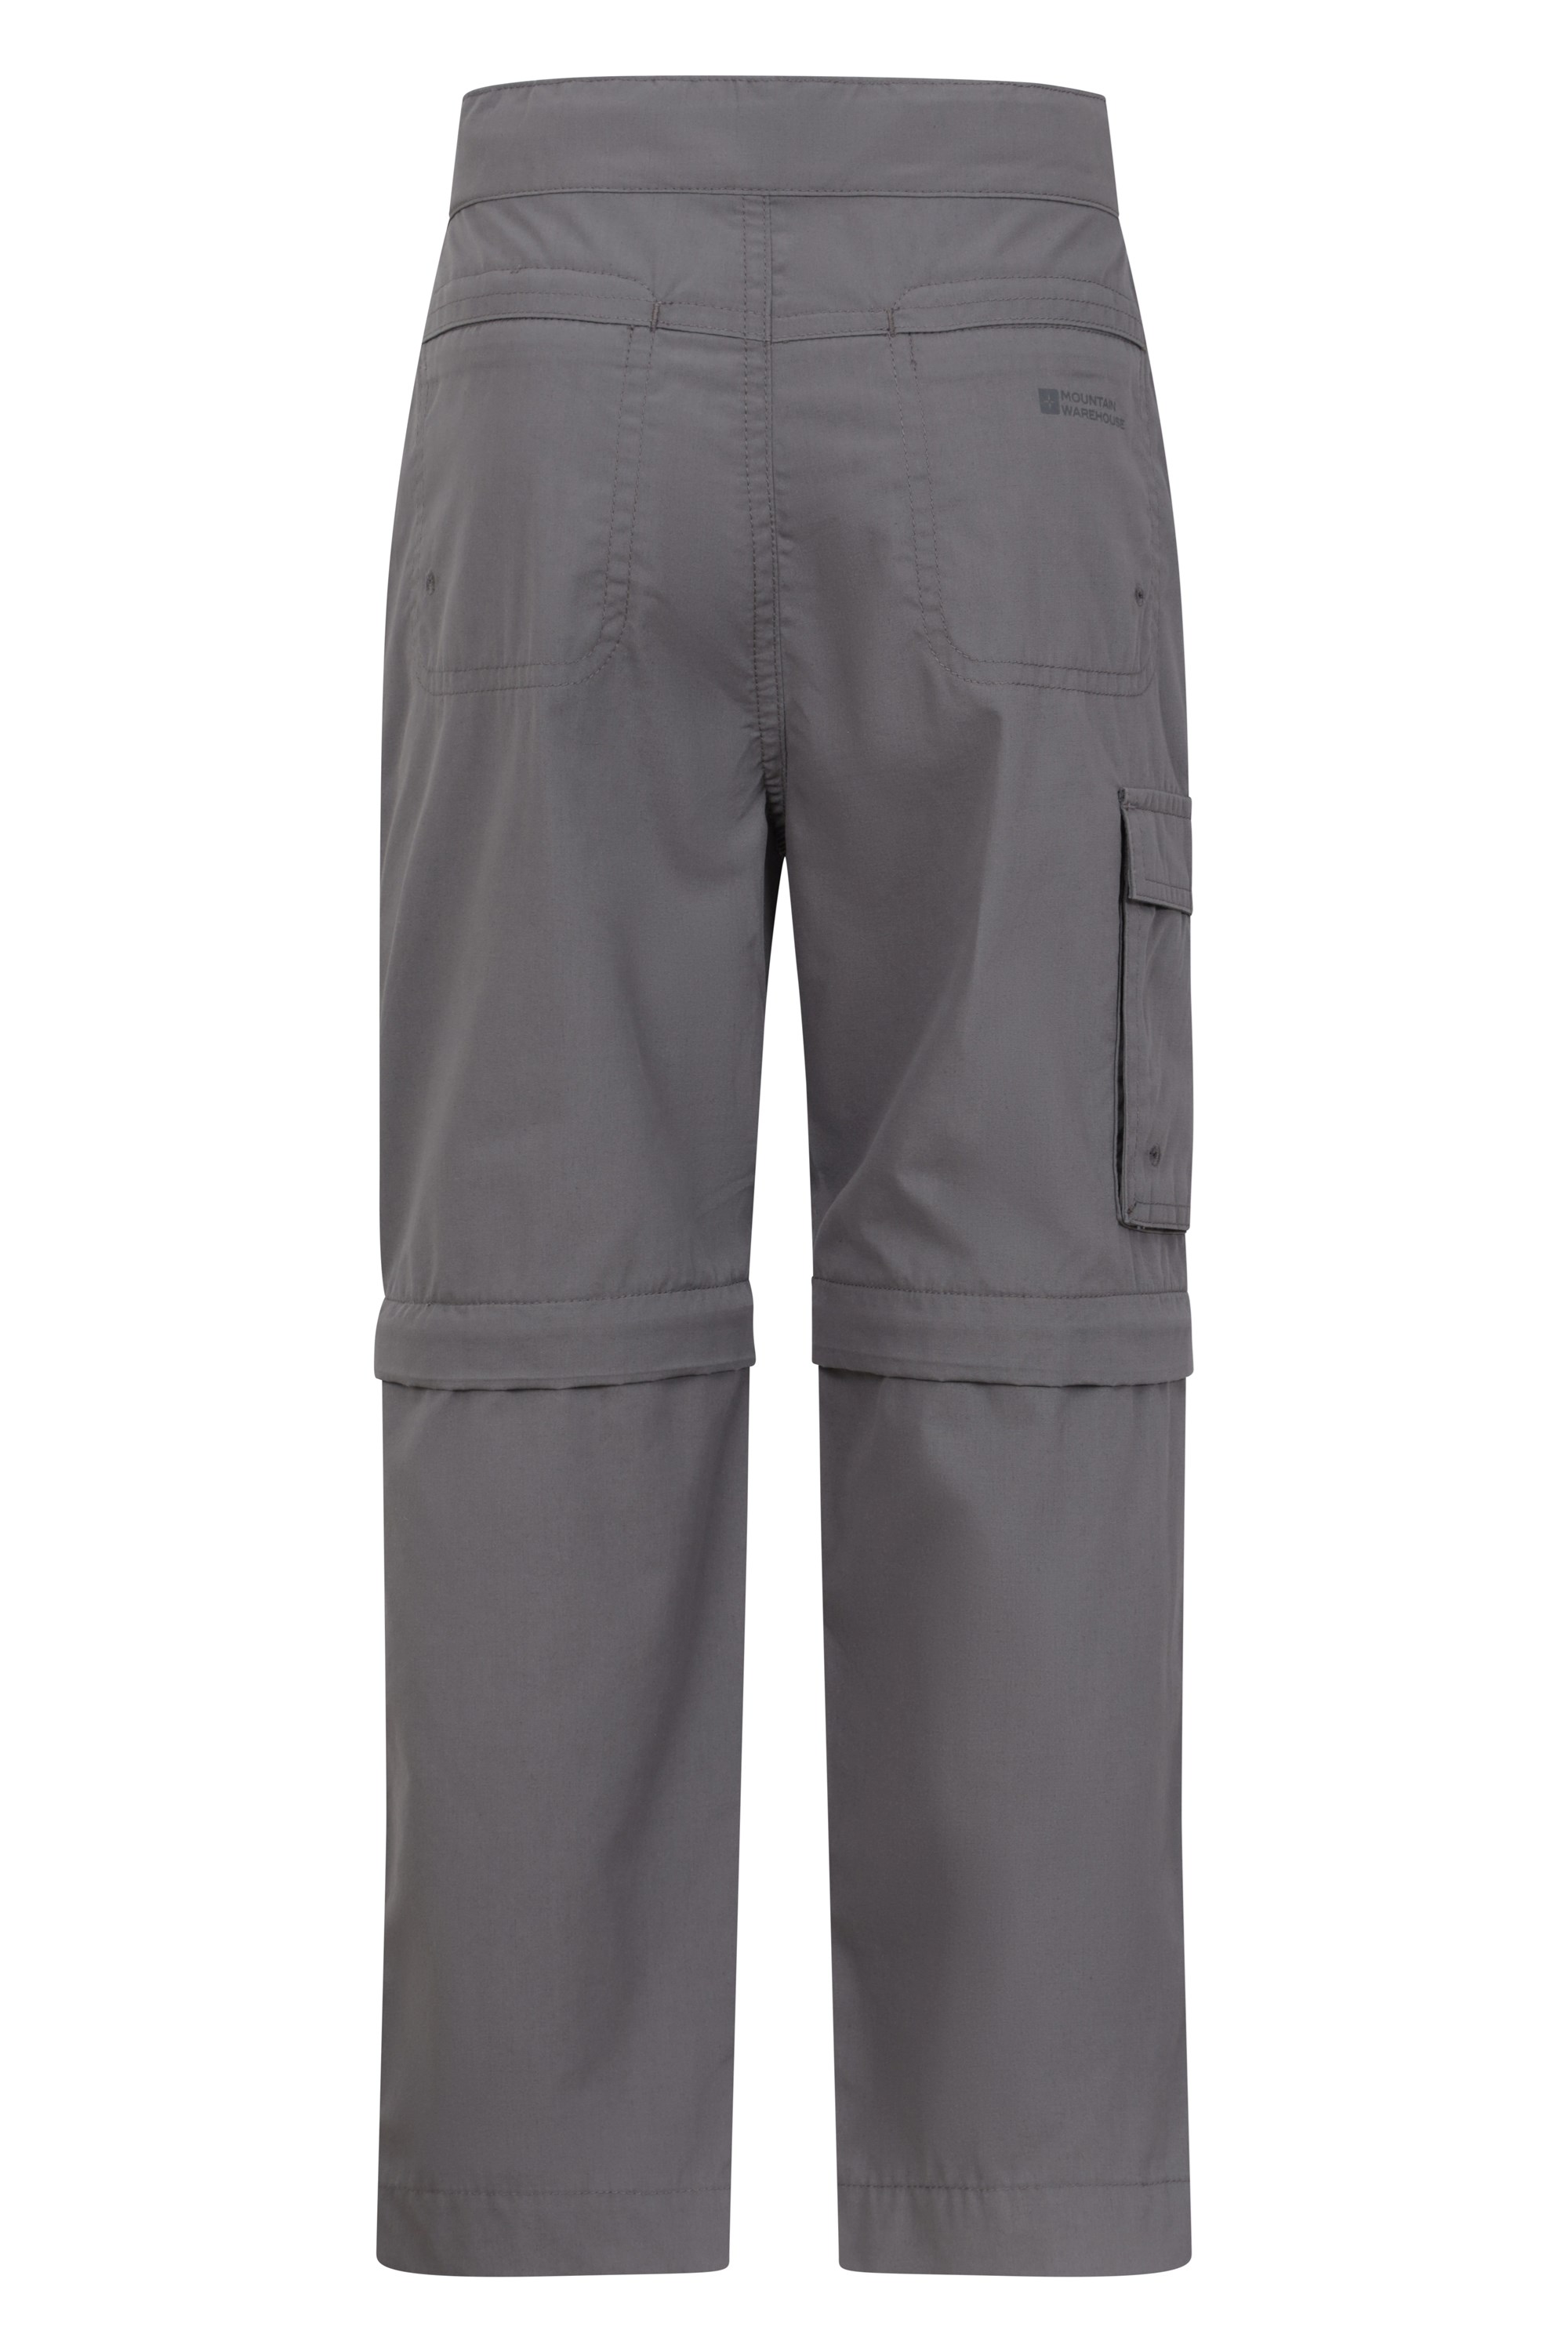 Active Kids Zip Off Trousers | Mountain Warehouse GB